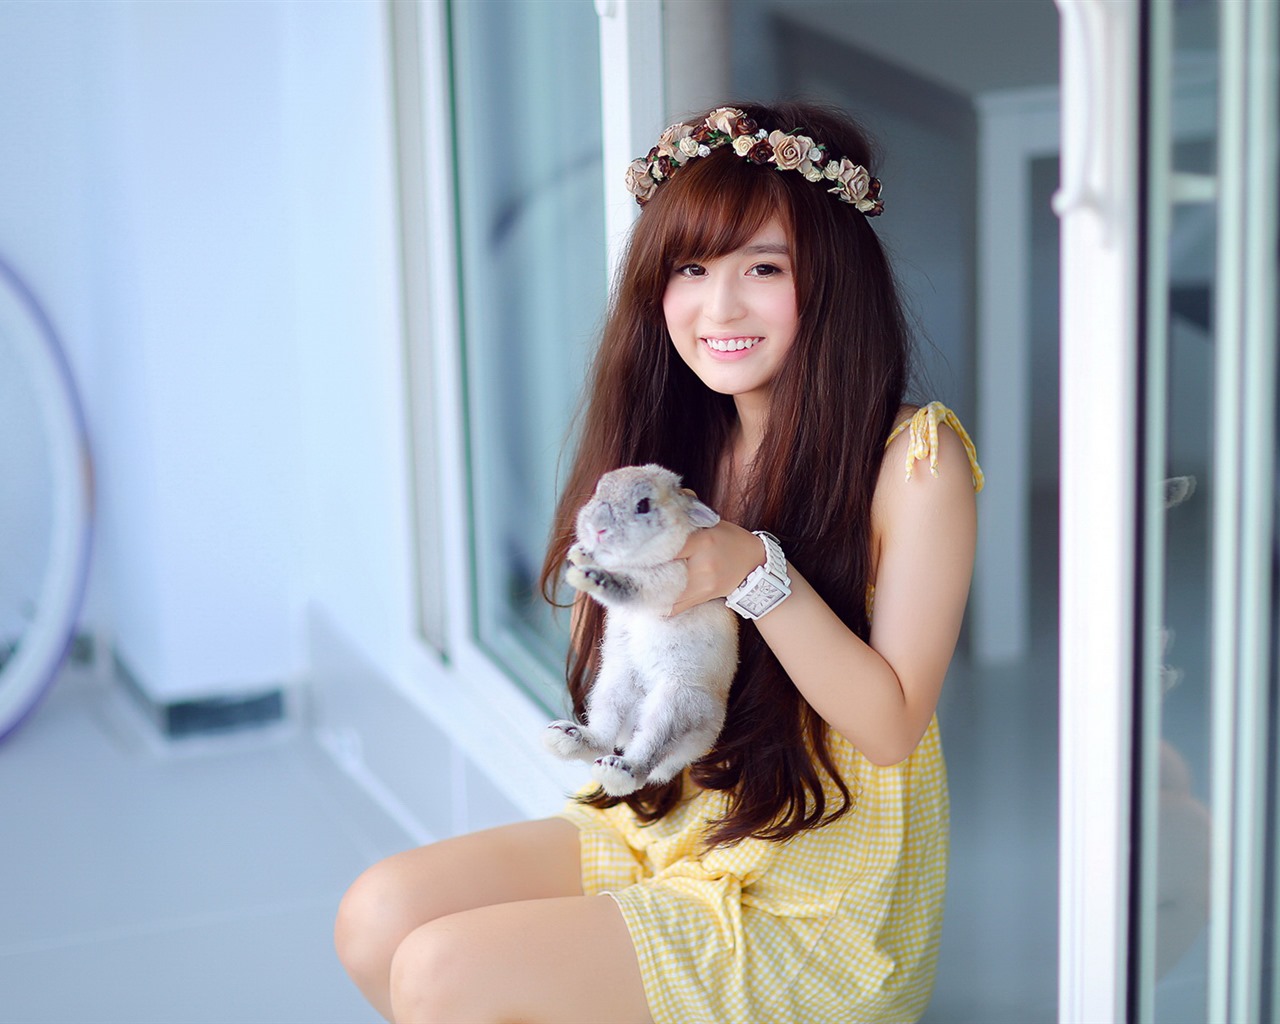 Pure and lovely young Asian girl HD wallpapers collection (5) #23 - 1280x1024